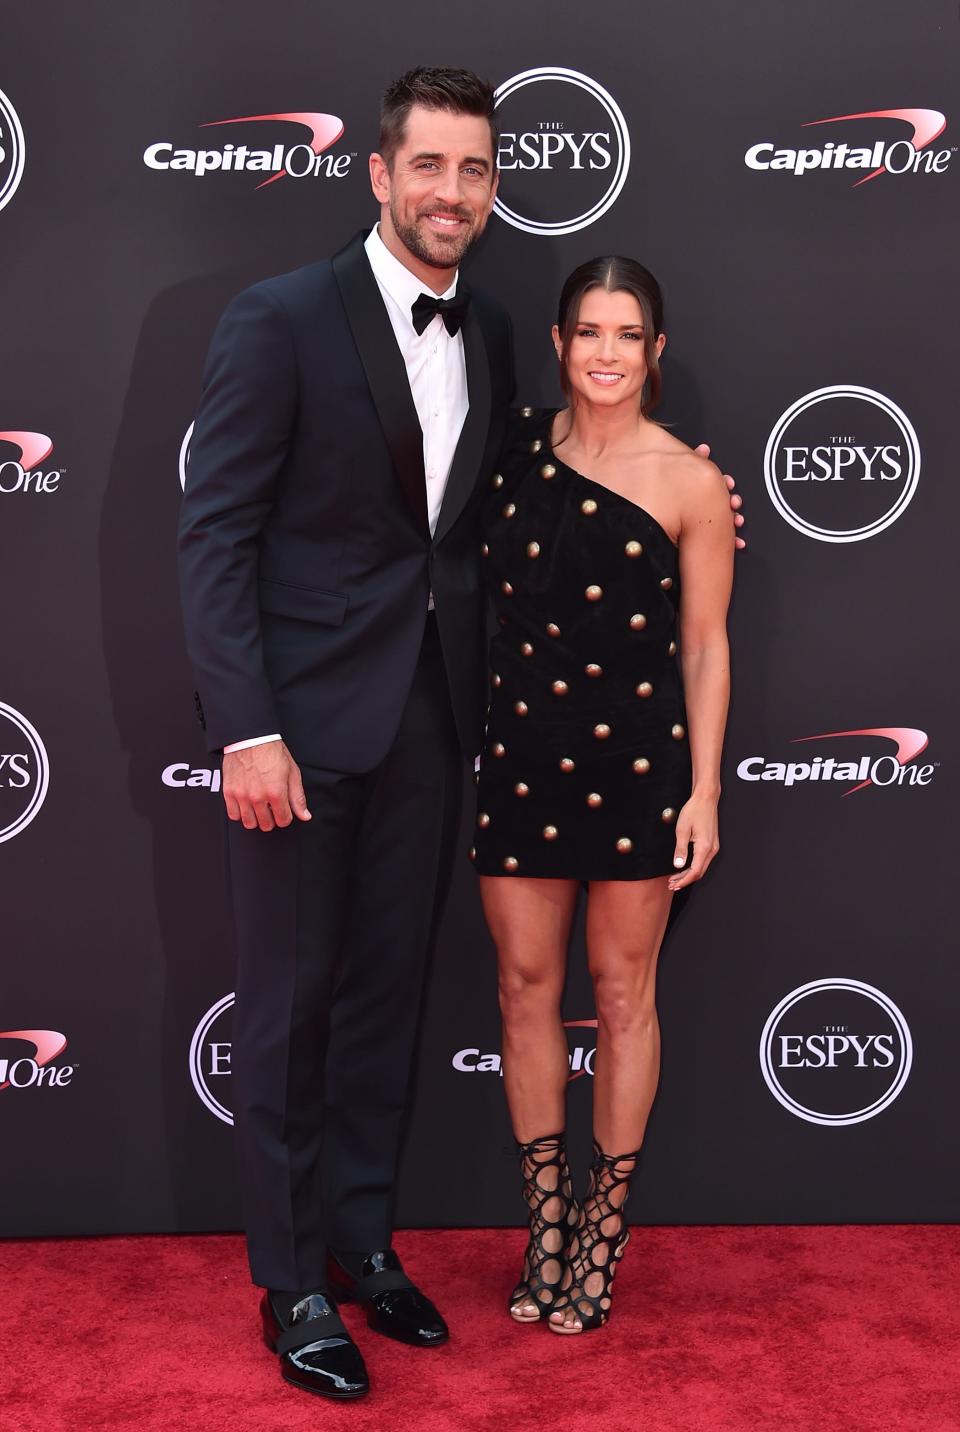 Aaron Rodgers and host Danica Patrick attend the 2018 ESPYS in July in Los Angeles.